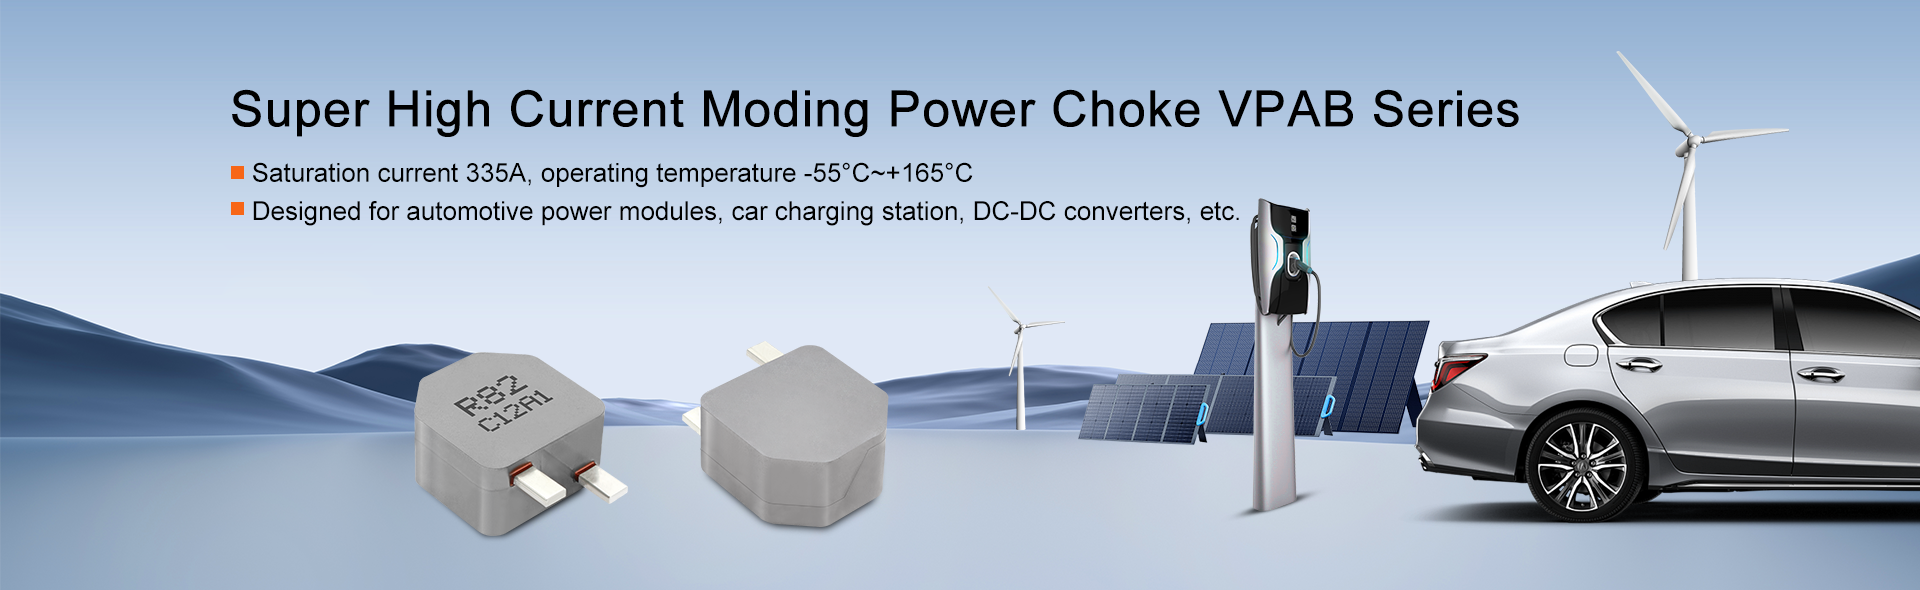 Automotive-grade VPAB3822 Series Molding Power Choke with 335A Saturation Current